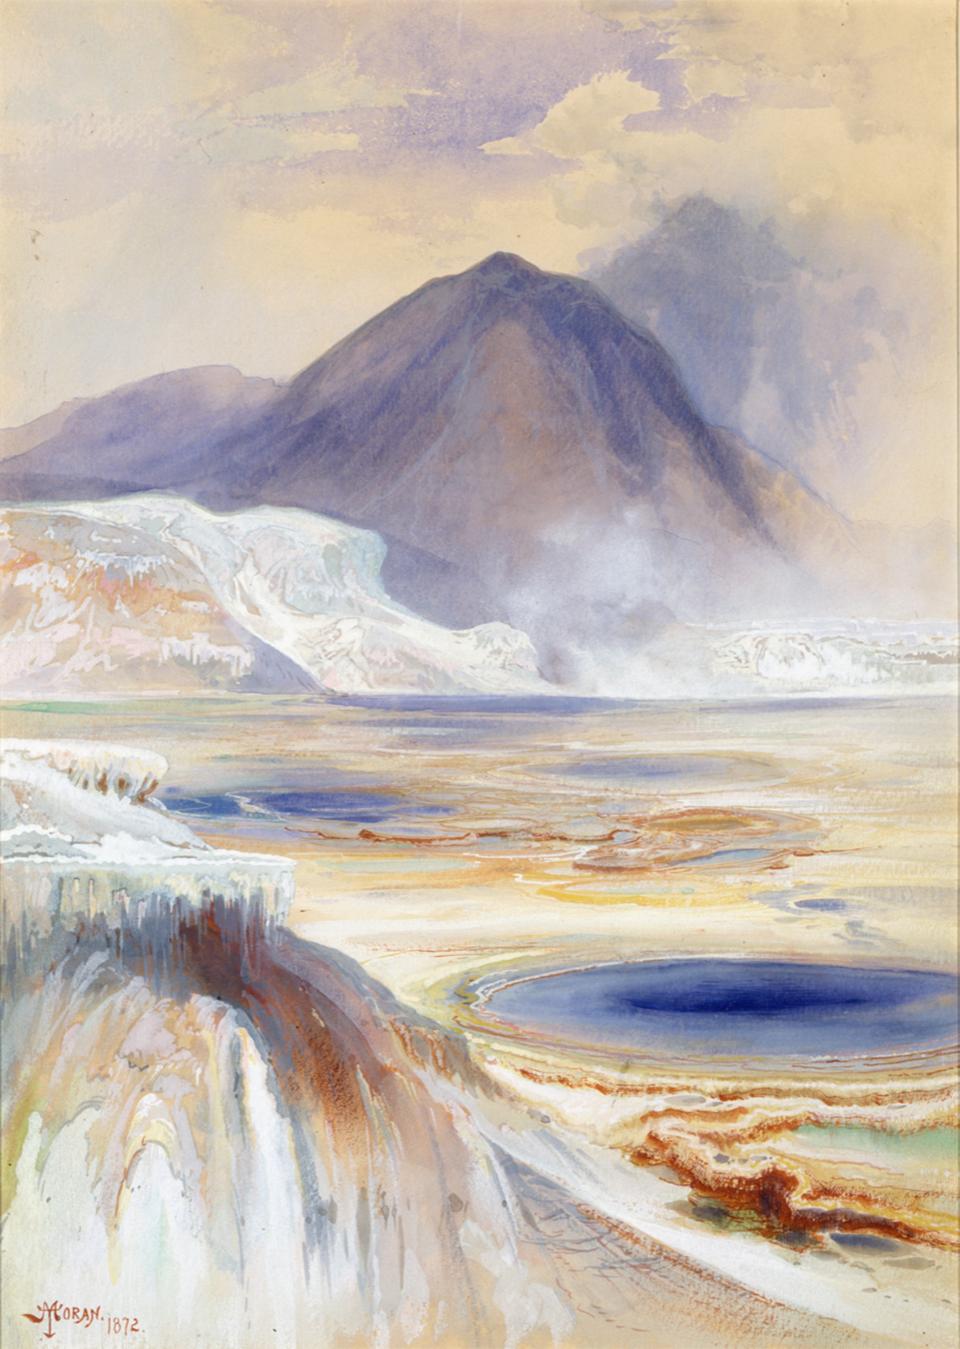 Mammoth Hot Springs, Yellowstone, 1872. Thomas Moran, watercolor and pencil on paper. Smithsonian American Art Museum.